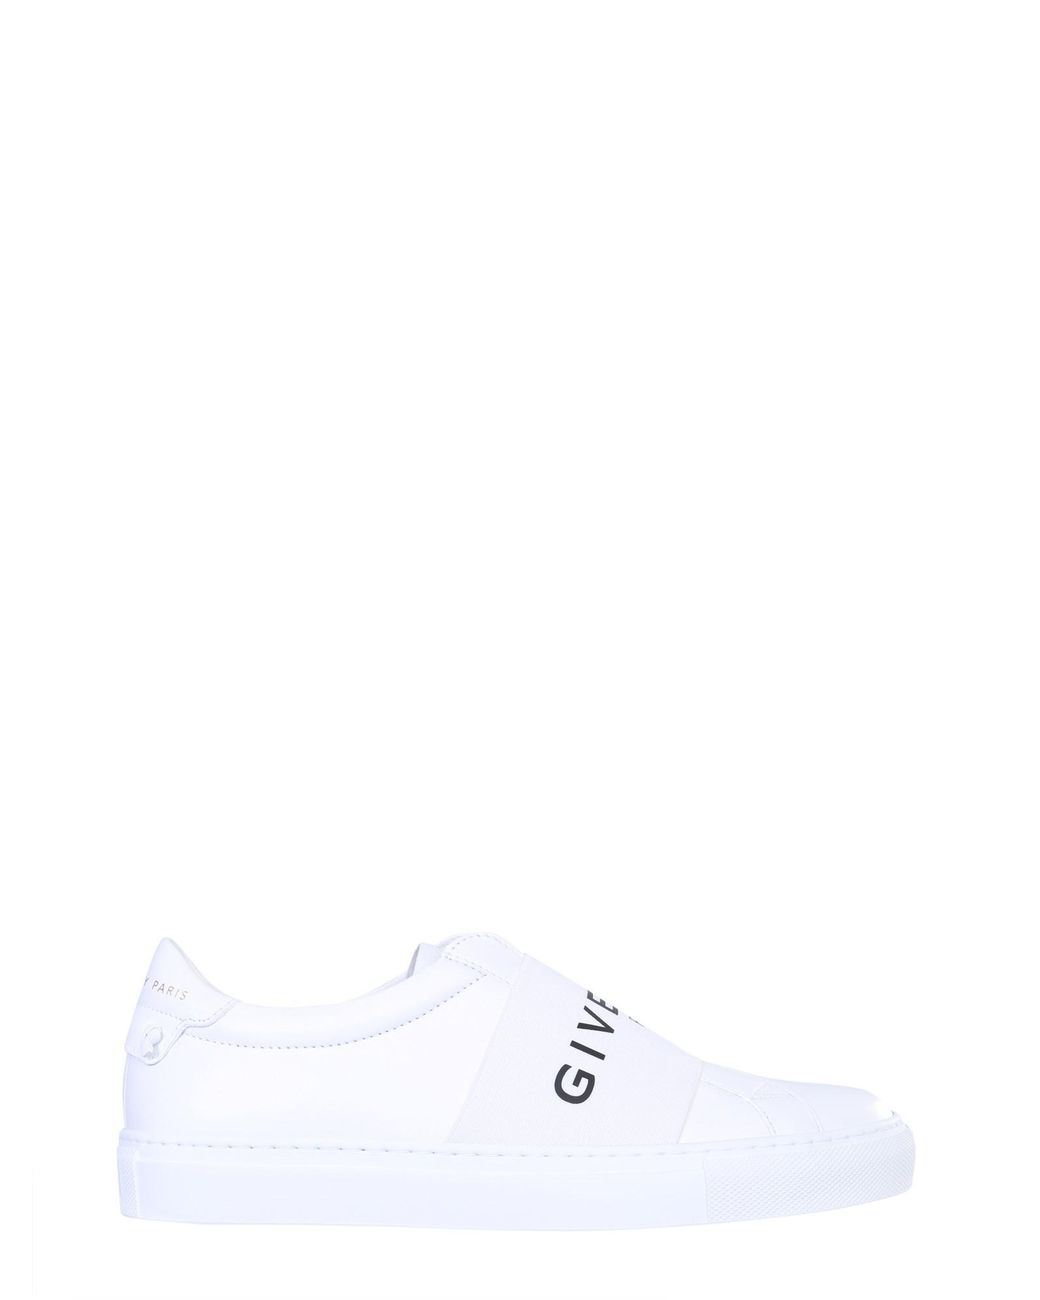 Givenchy Paris Webbing Sneaker Leather White - Save 57% - Lyst